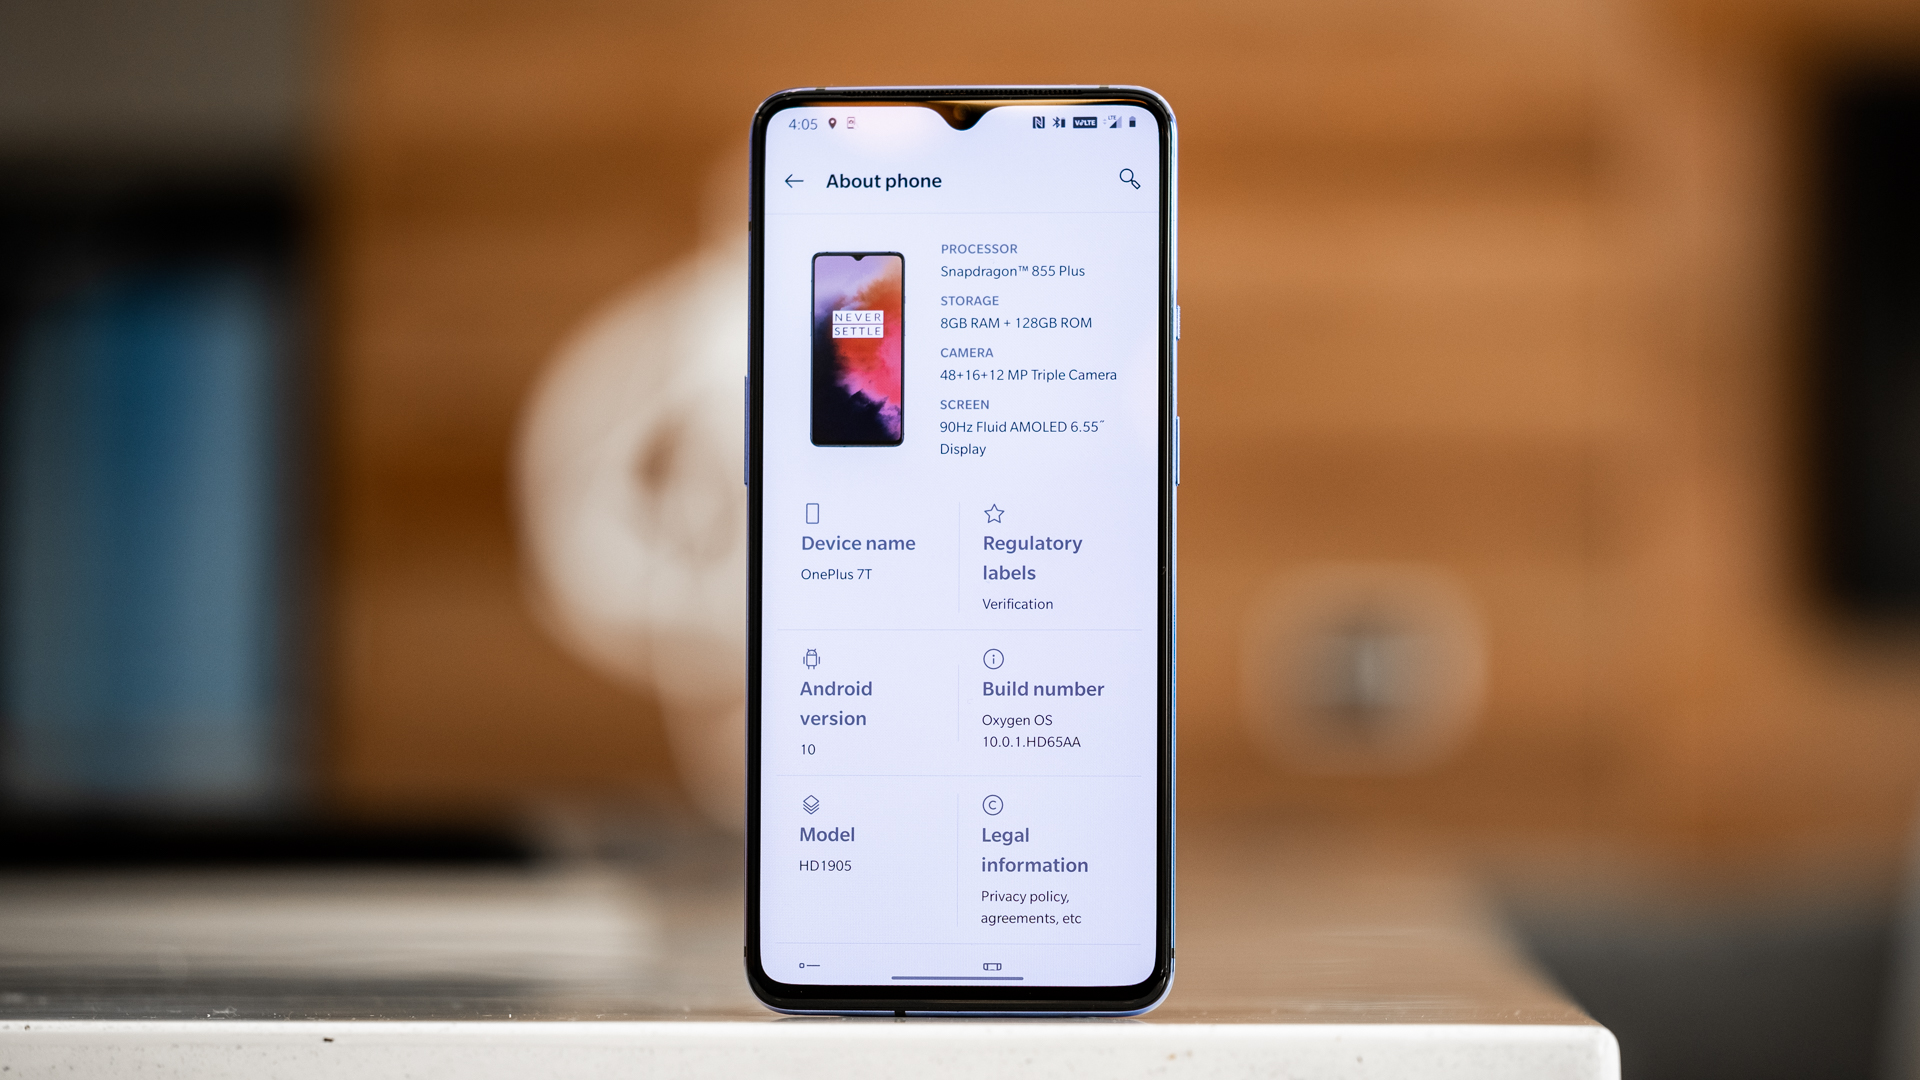 OnePlus 7T specs page on screen